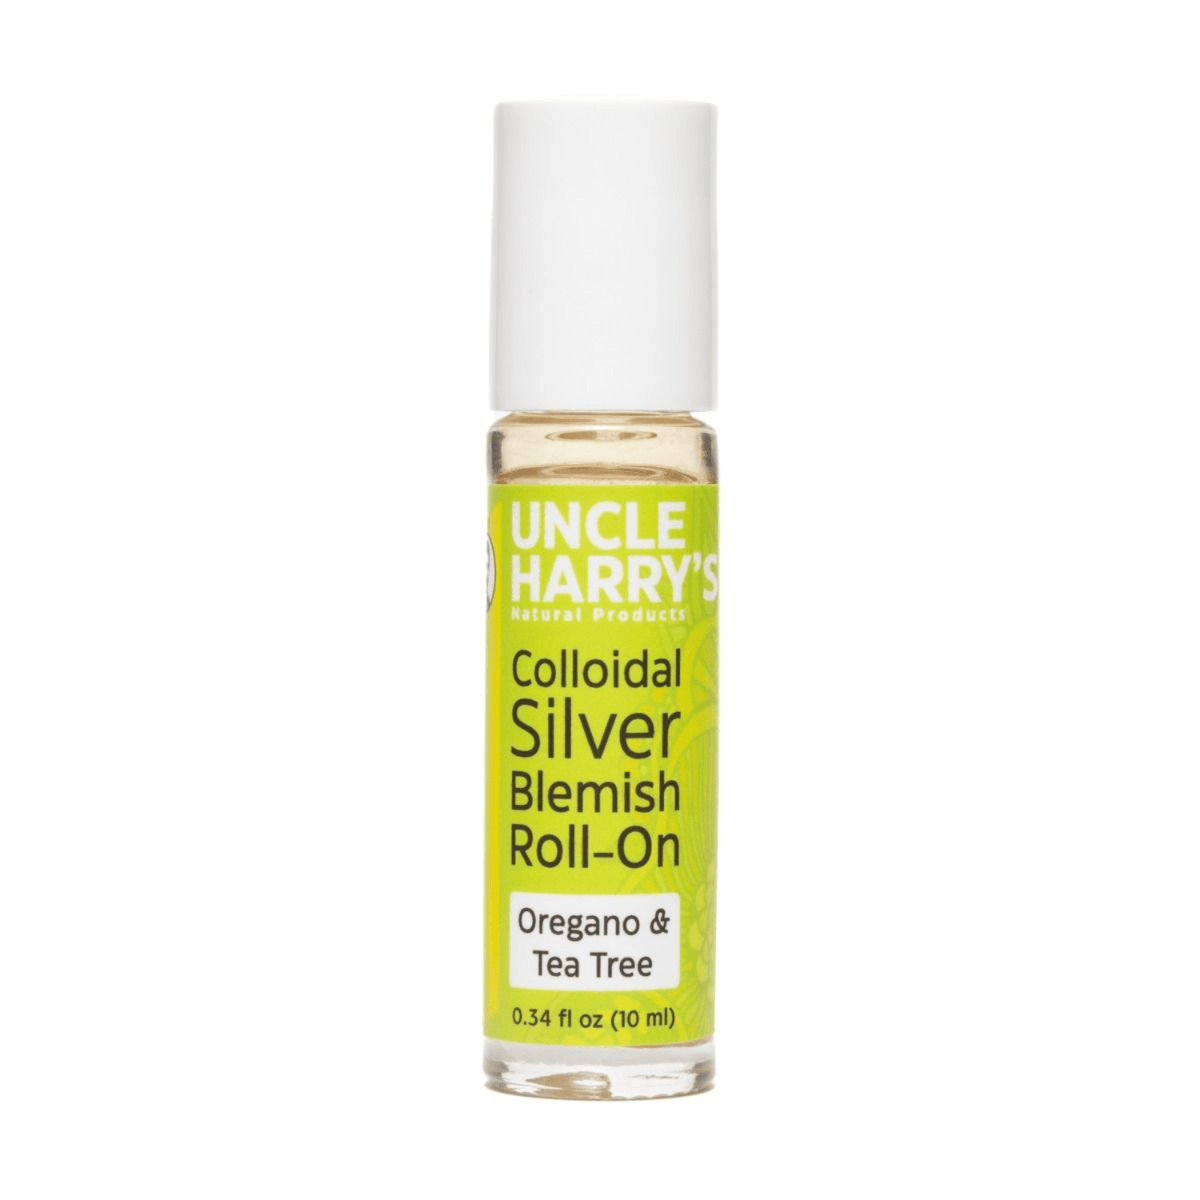 Uncle Harry's Natural Products Colloidal Silver Blemish Roll On (0.34 fl  oz) – Smallflower